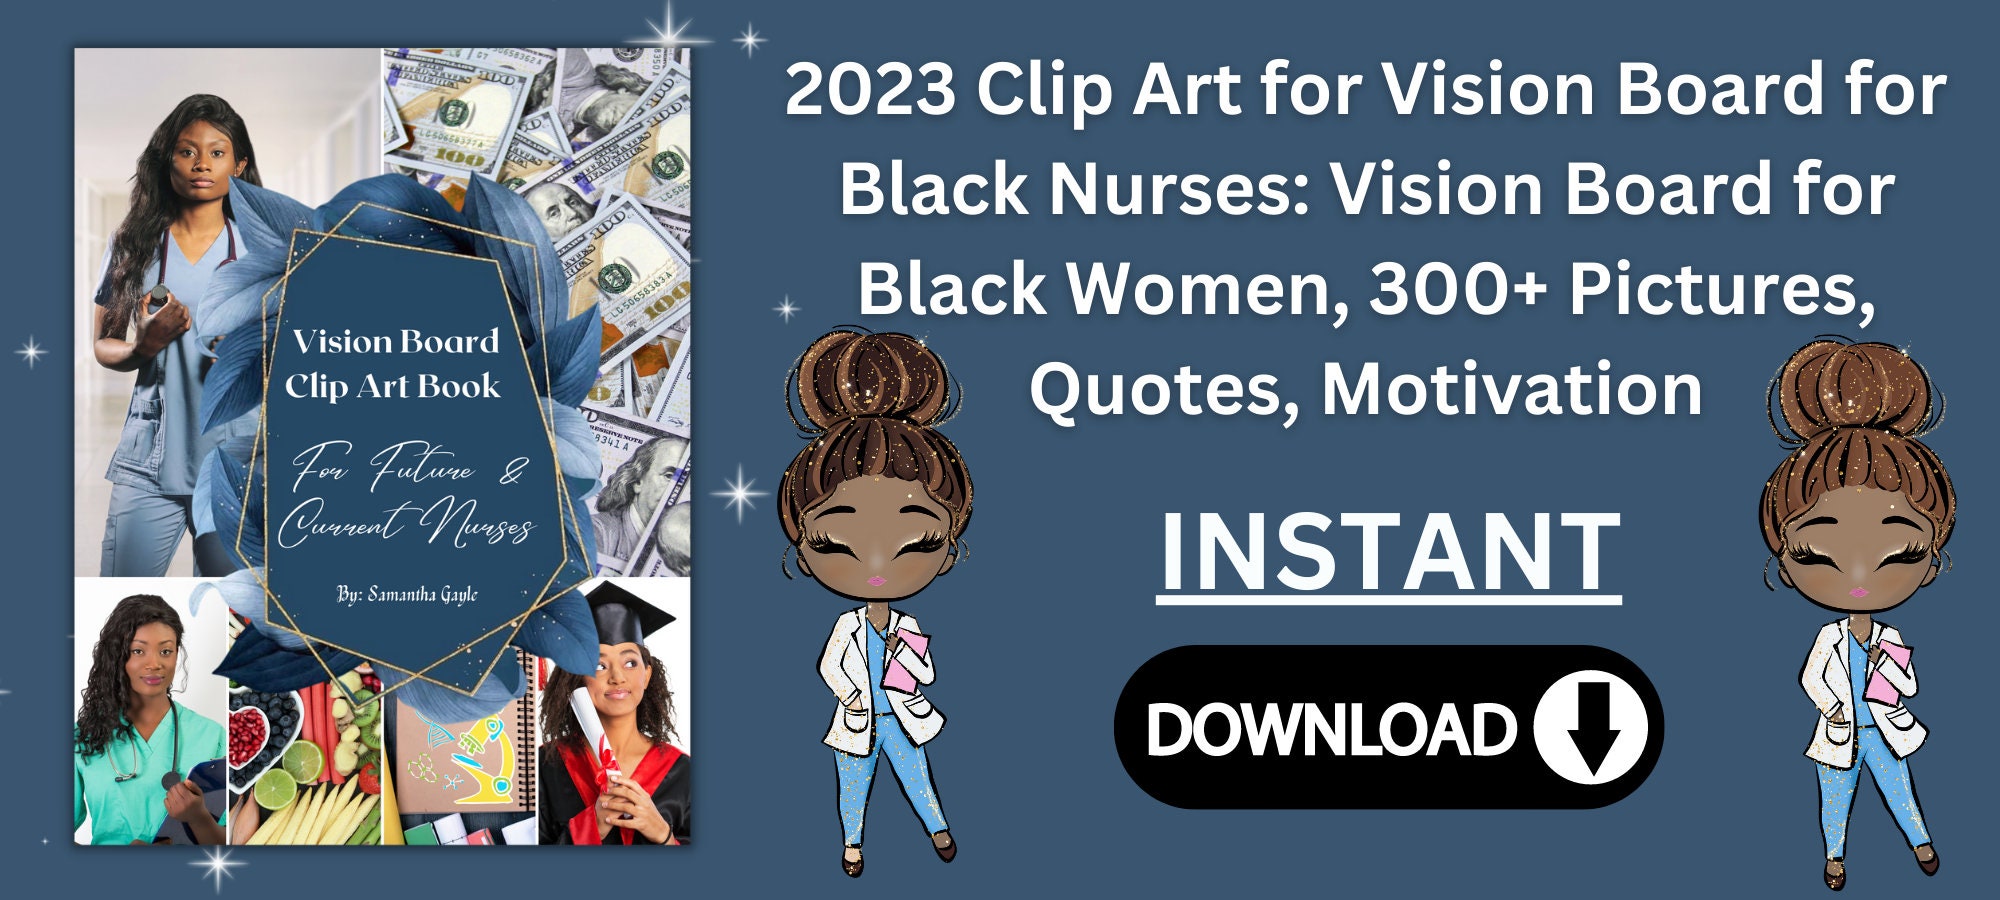 2023 Vision Board Clip Art Book: 300+ Vision Board Pictures, Quotes & Words  in All Categories, Vision Board Supplies for Women, Magazines for Vision  Board Clip Art Book and Collage Book 